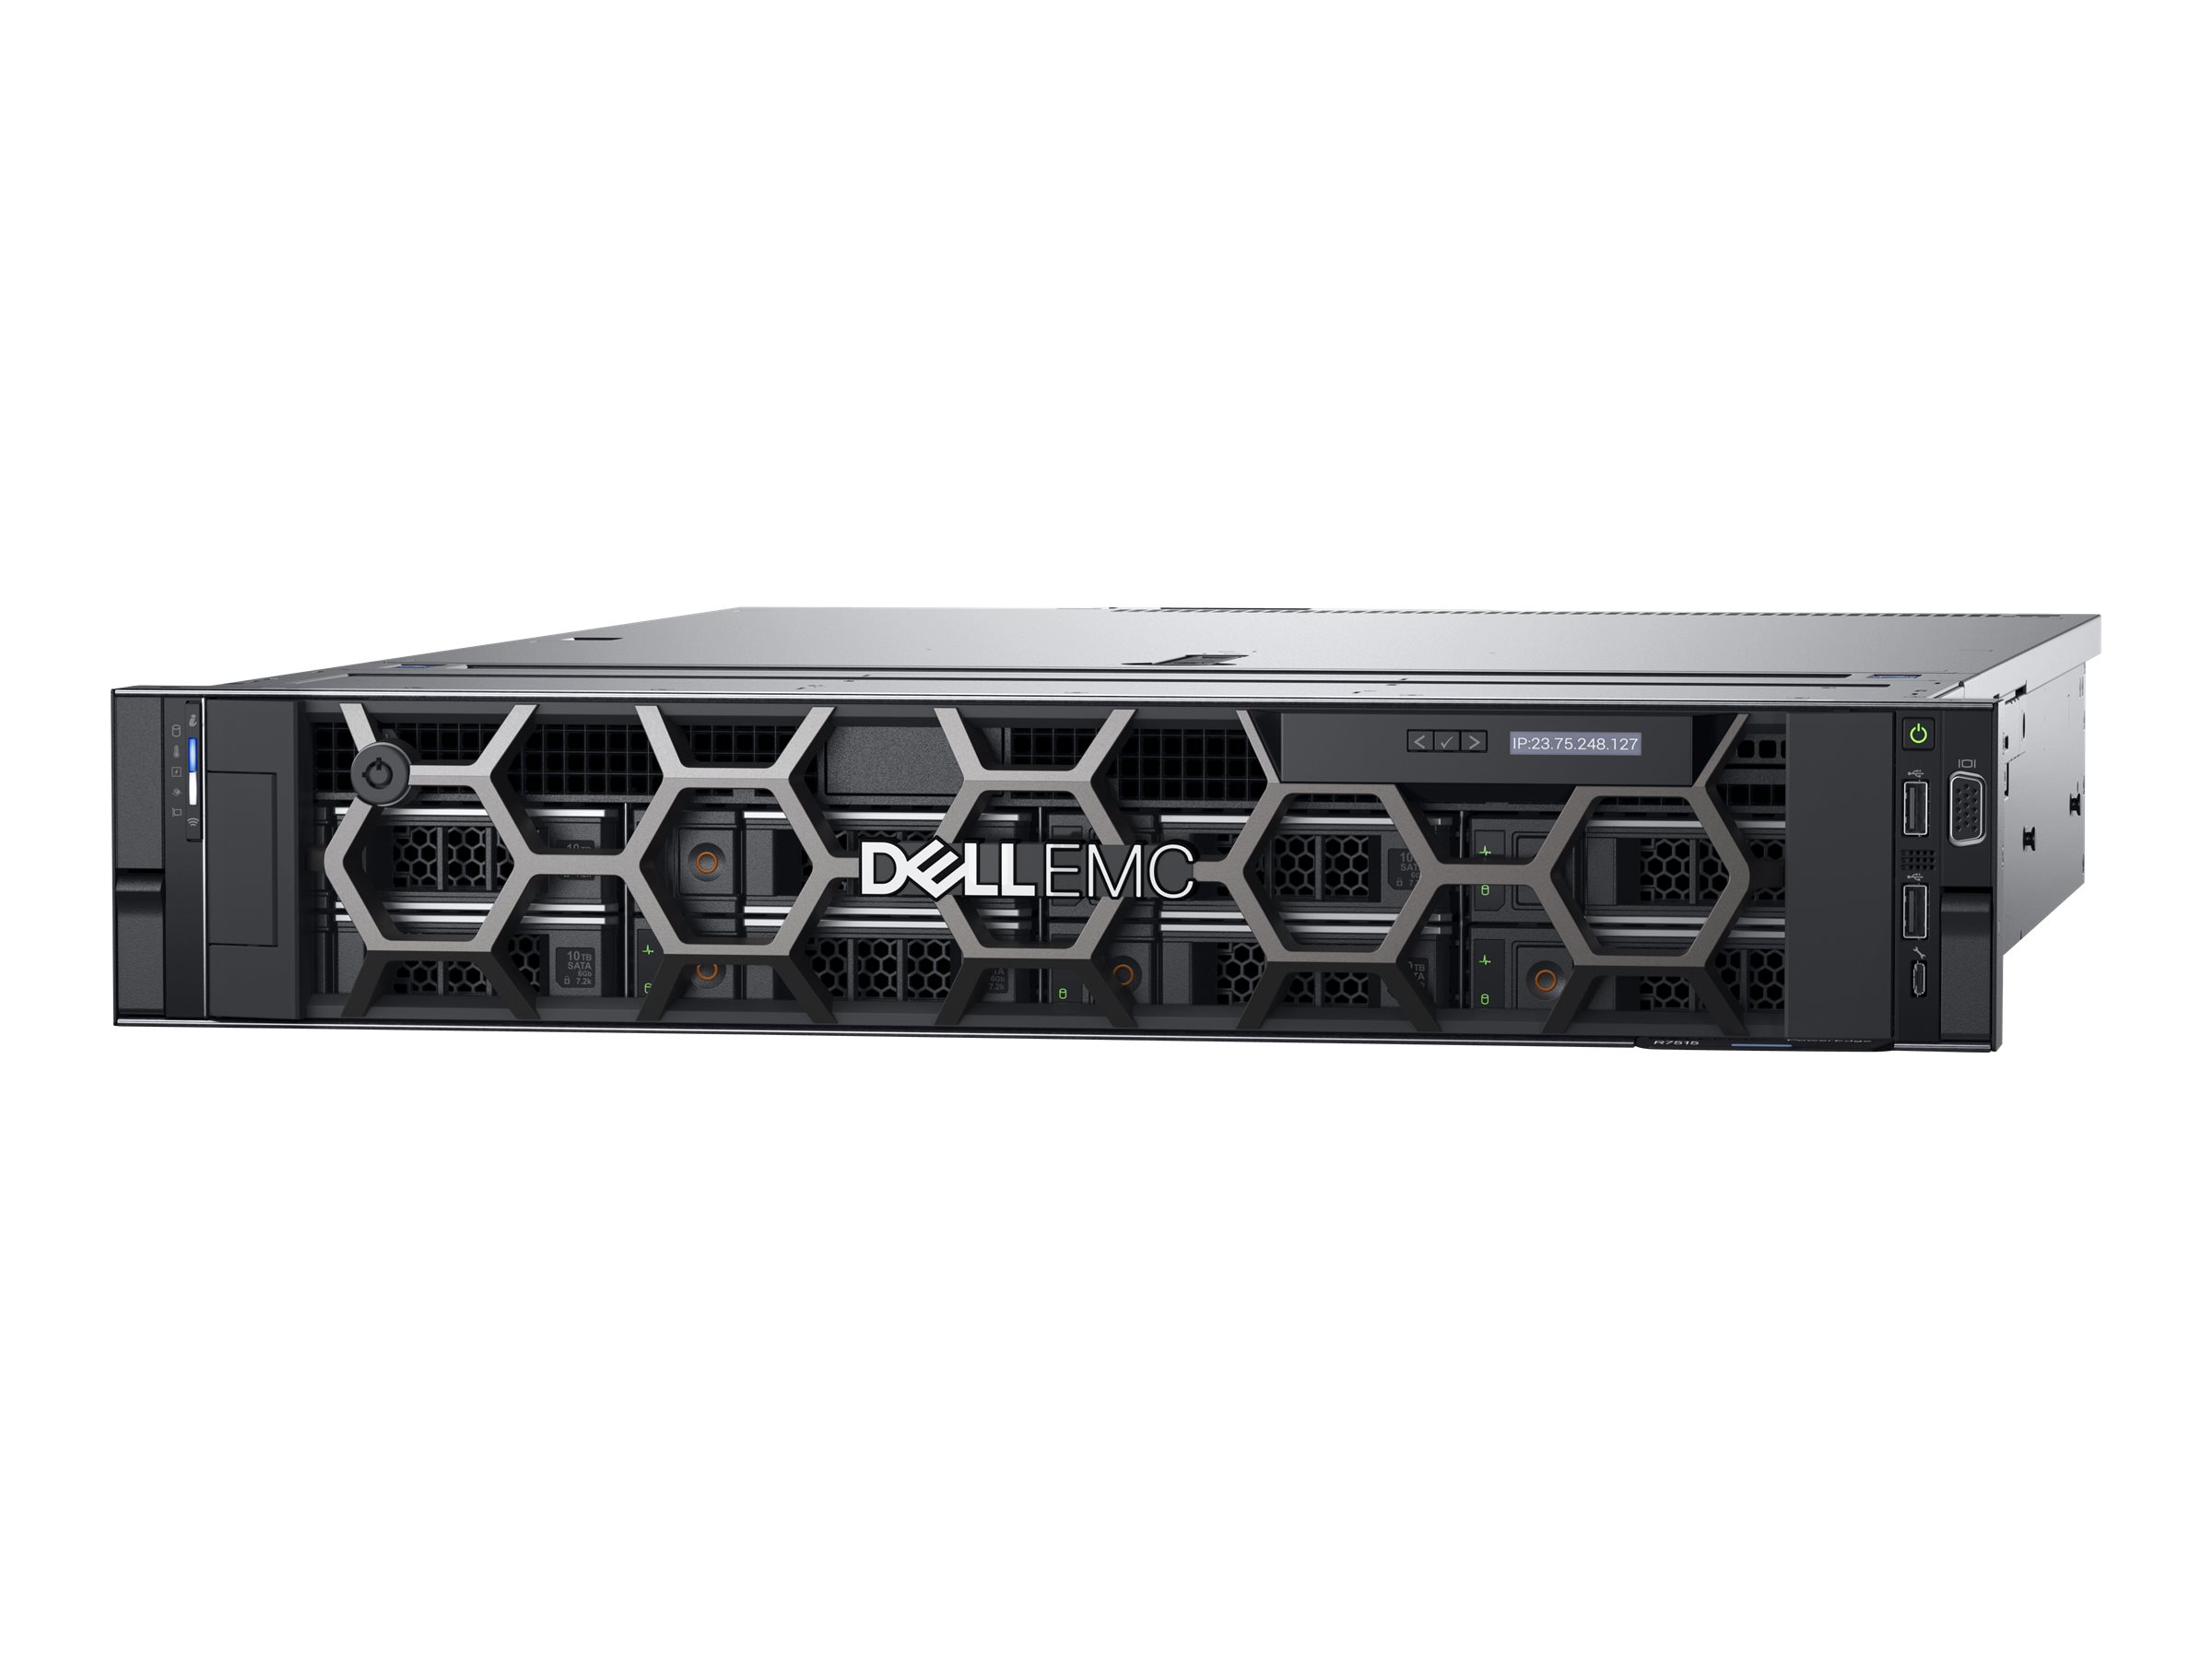 3 Things You Need to Know Before Selling the Server Dell PowerEdge R7515